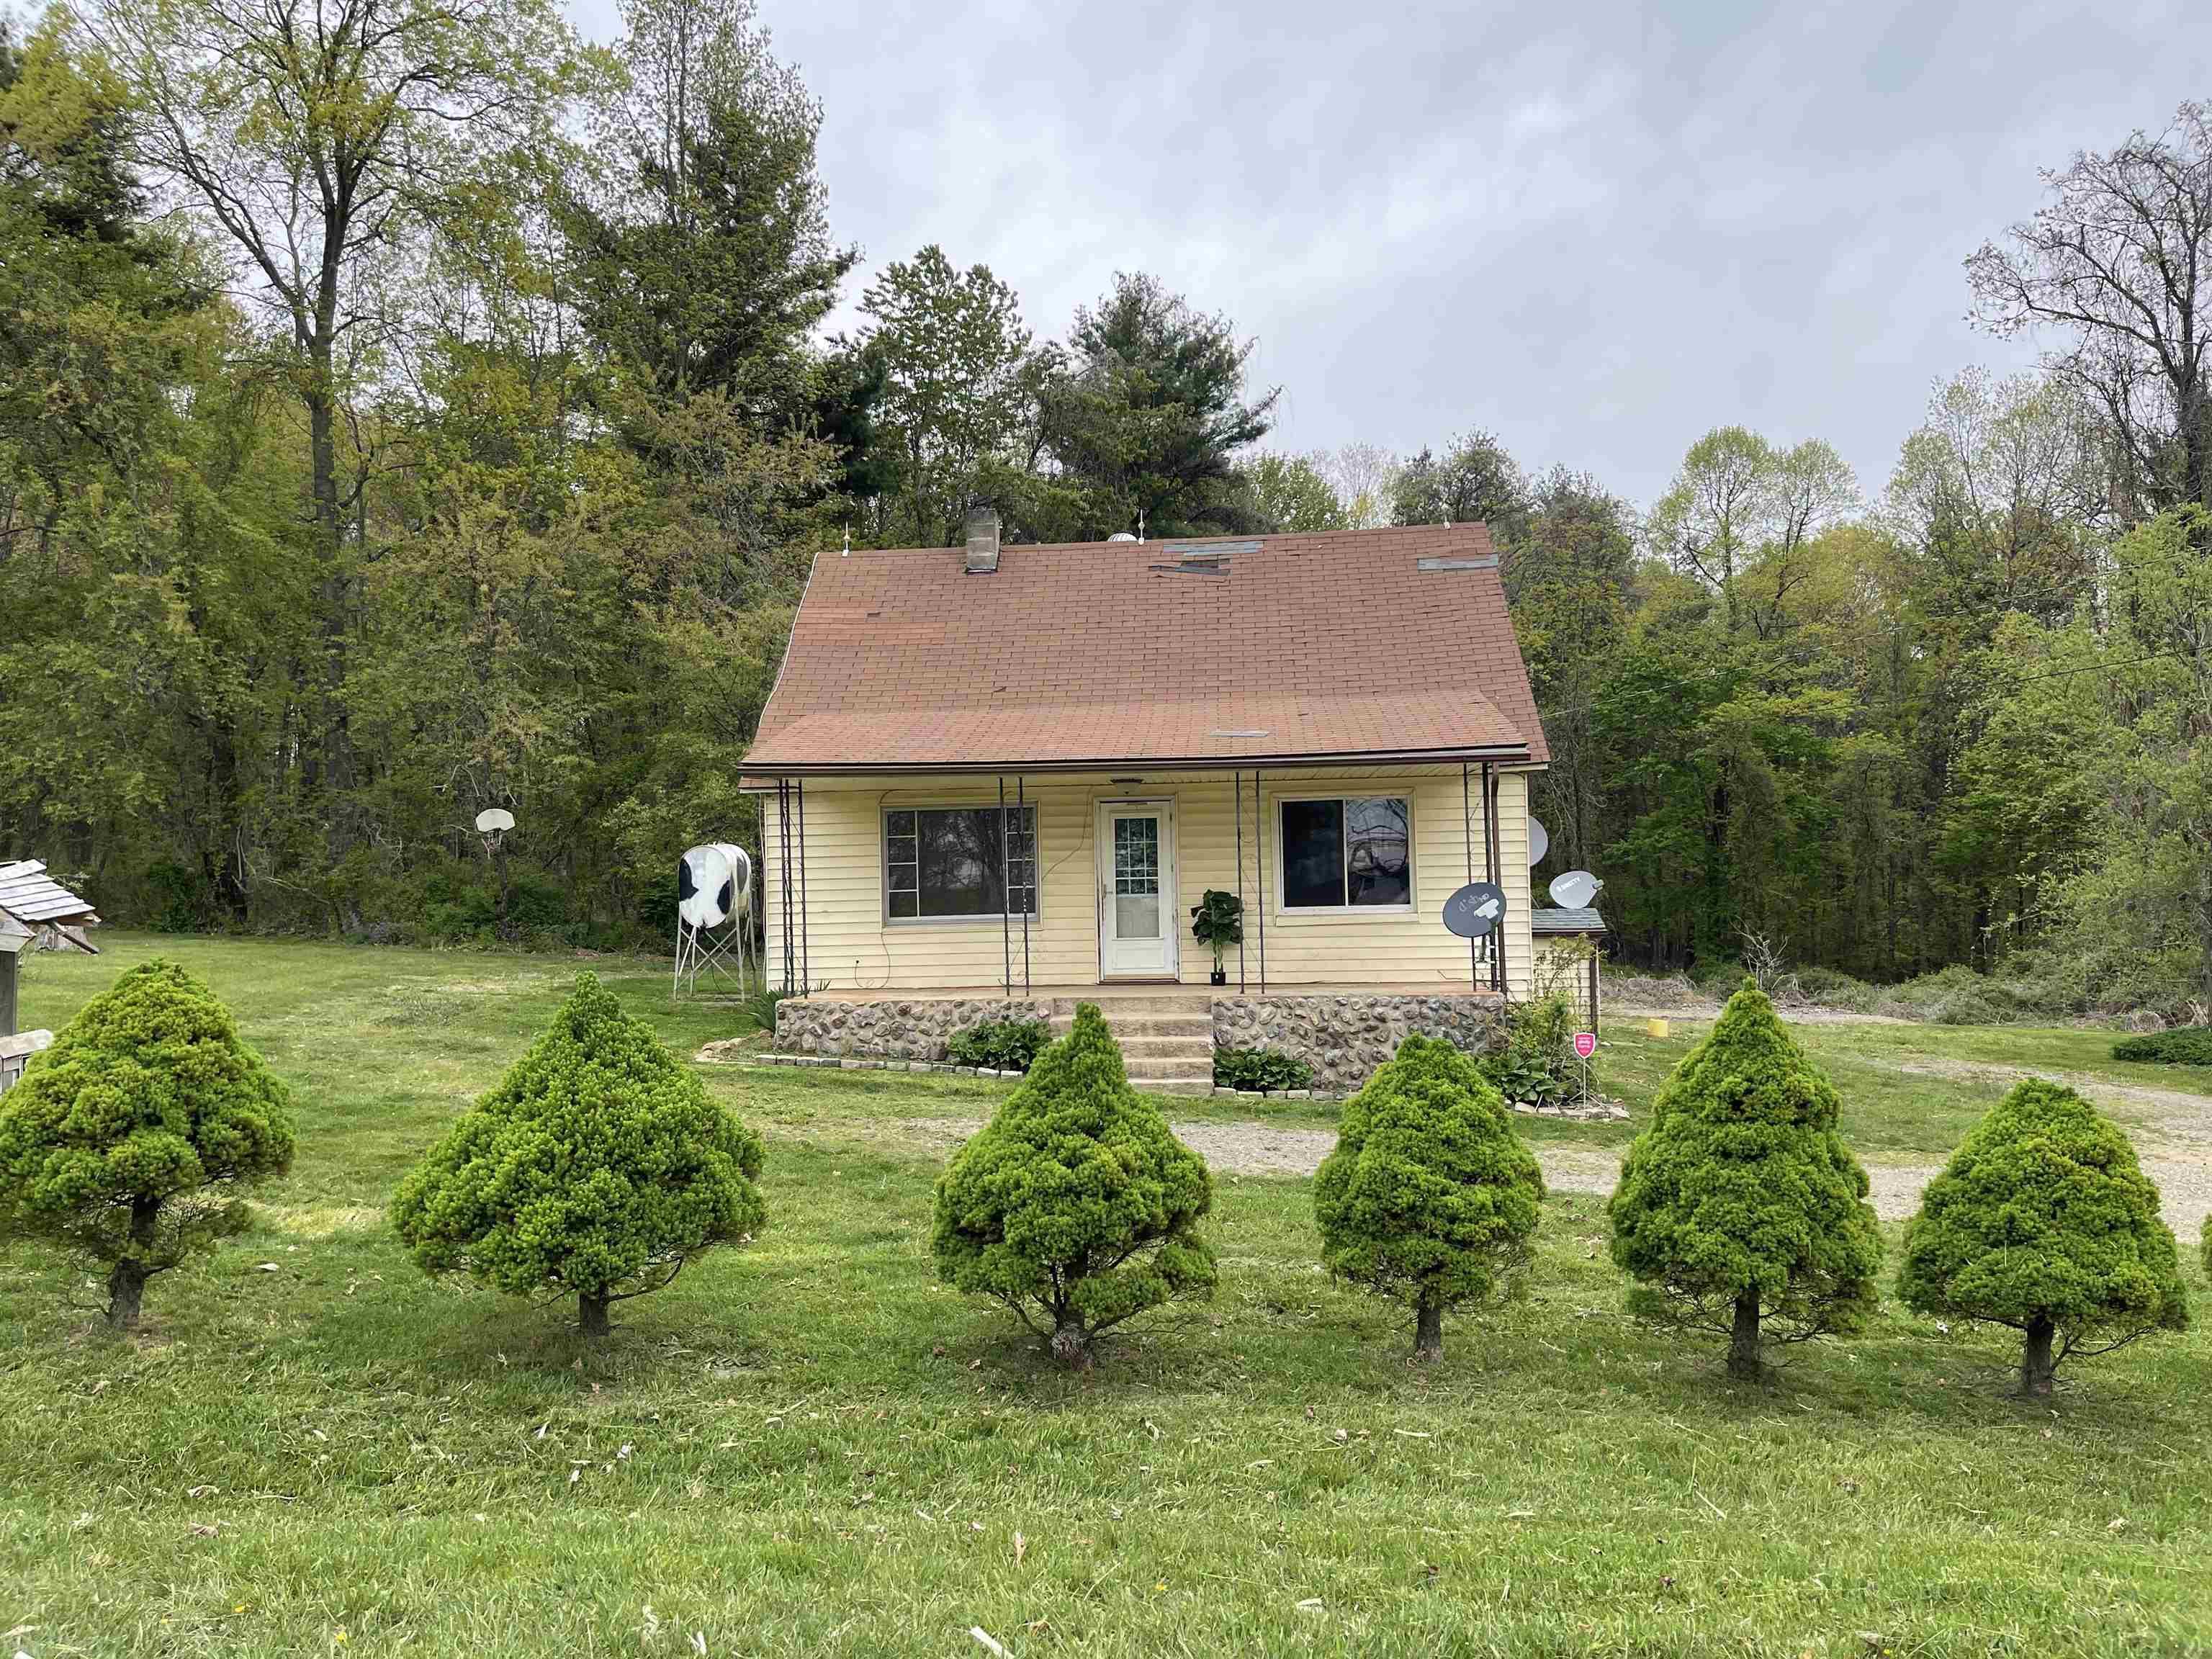 Cute two bedroom, 1 bath cottage style home on 1/4 acre. Some updates include fresh paint, updated heating system and updated bathroom. Many upgrades left to make this home your own. Great starter home. Perfect if you're looking to downsize. Convenient to interstate 77, Hillsville, Galax and Wytheville. Start collecting your own eggs by utilizing the chicken coop already built for you. Heated with a new monitor heater, internet to be determined by buyer/buyer's agent. New tile in bathroom unfinished. Tile to finish already purchased.